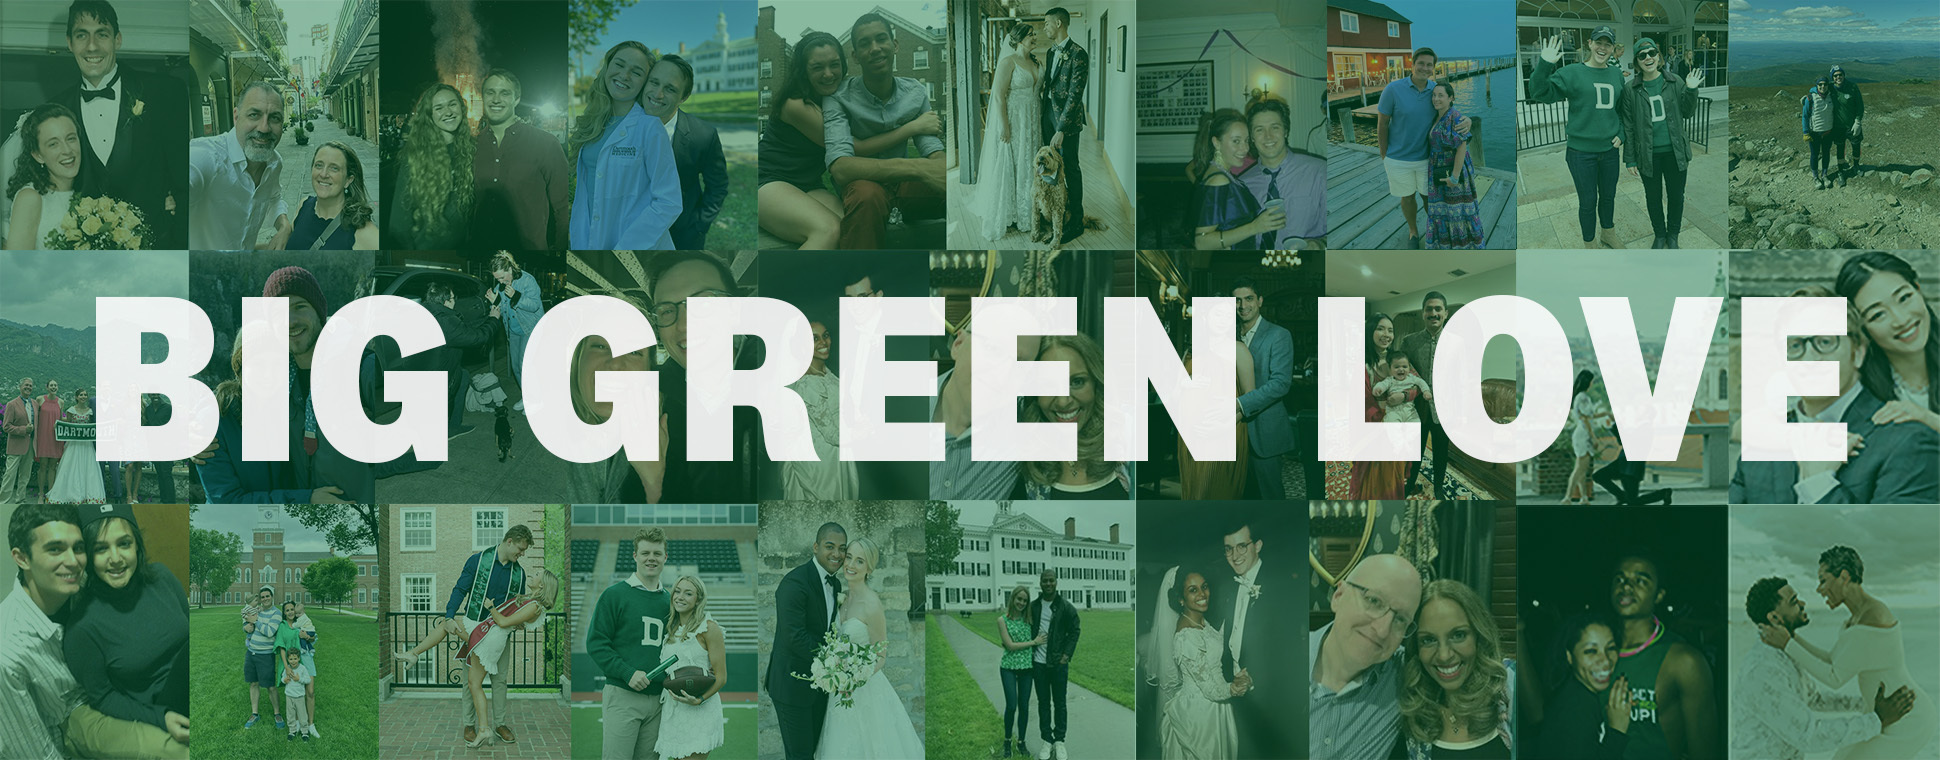 Big Green Love overlaid on a collage of couples' photos